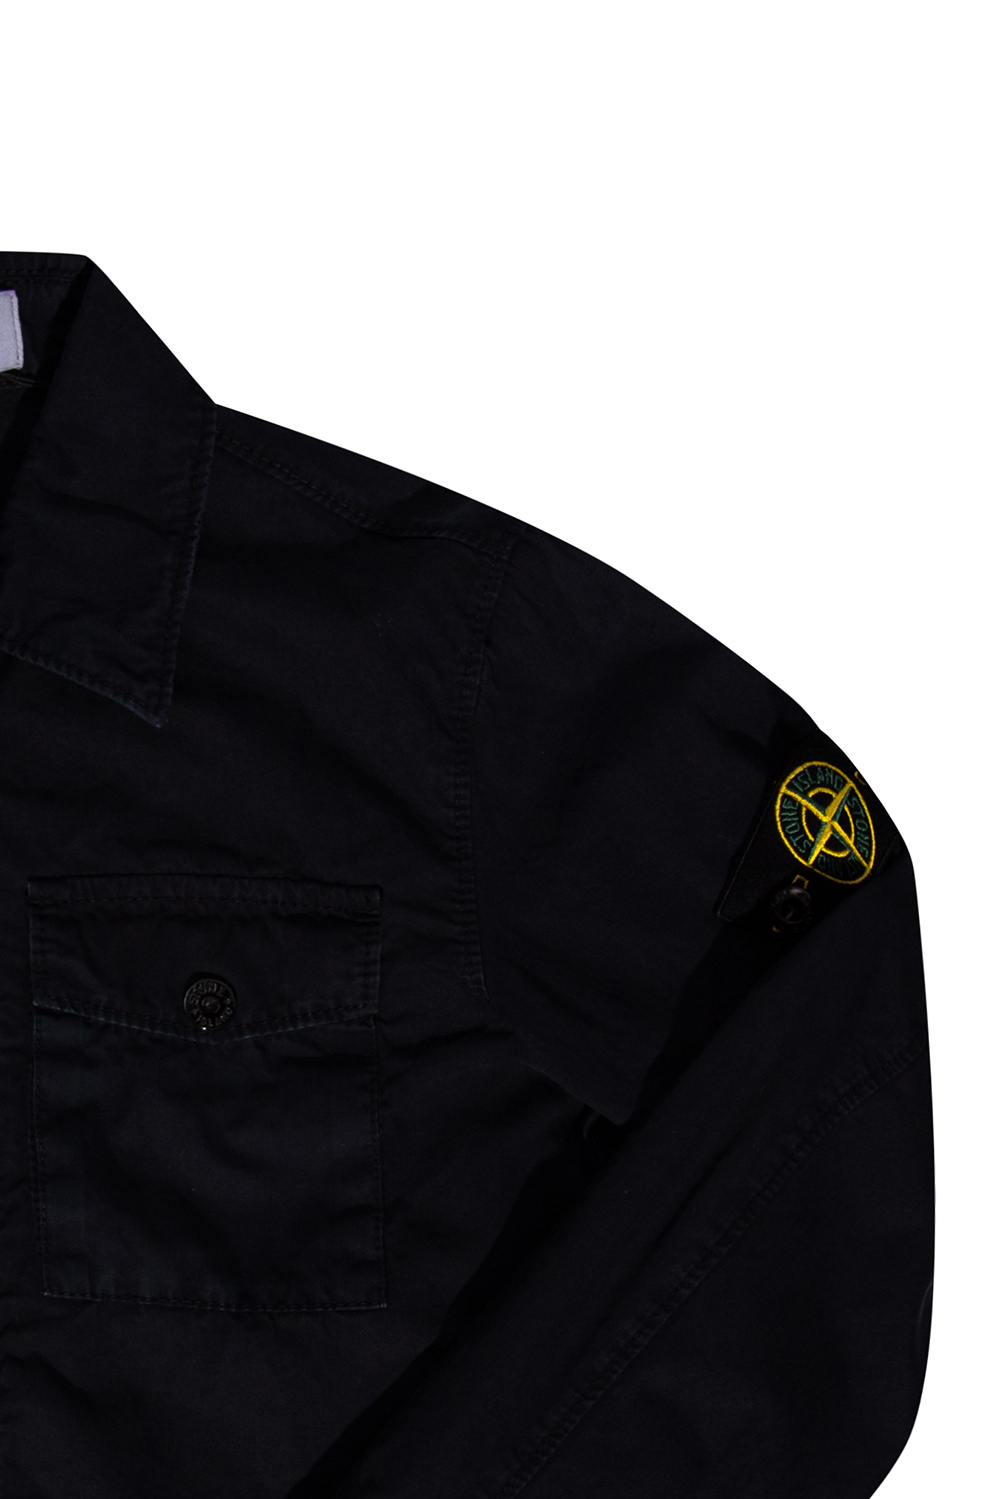 Stone Island Kids The jacket with collar